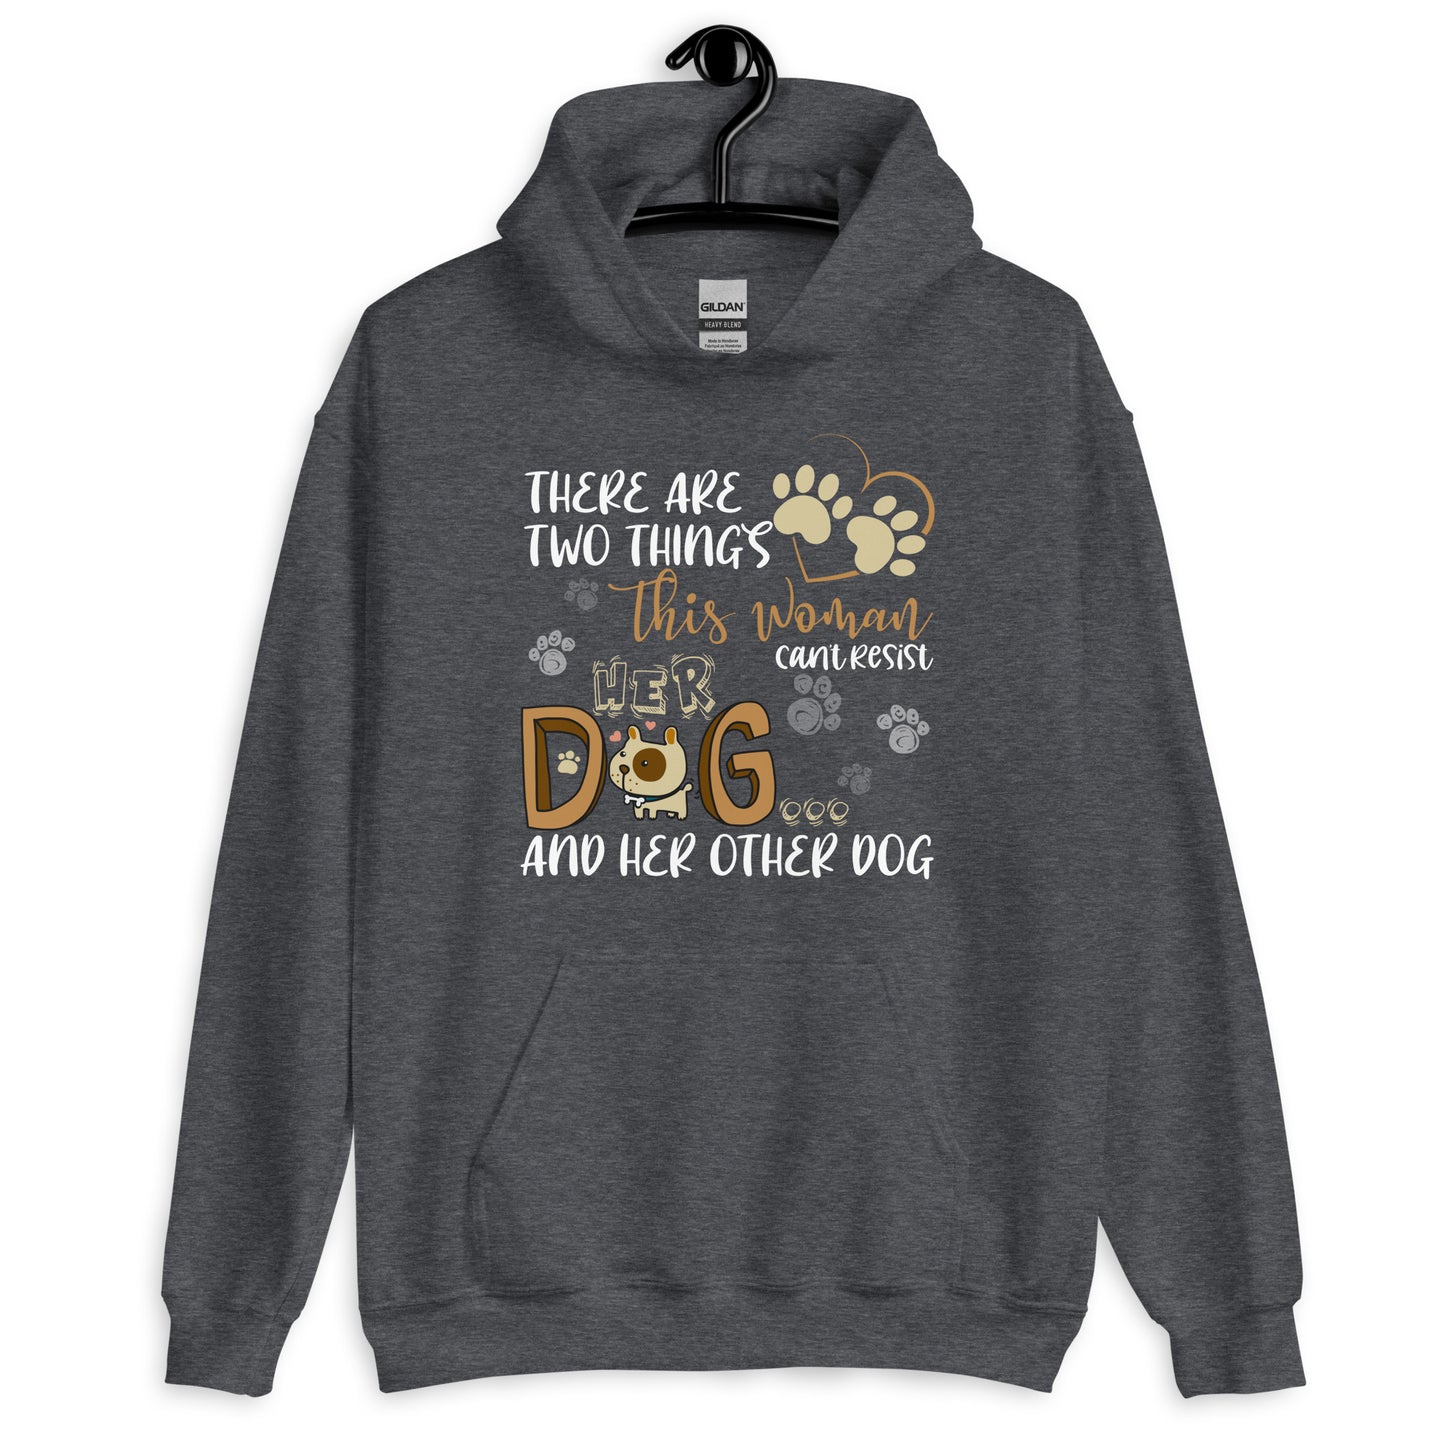 This Woman Can't Resist Her Dog and Her Other Dog Hoodie